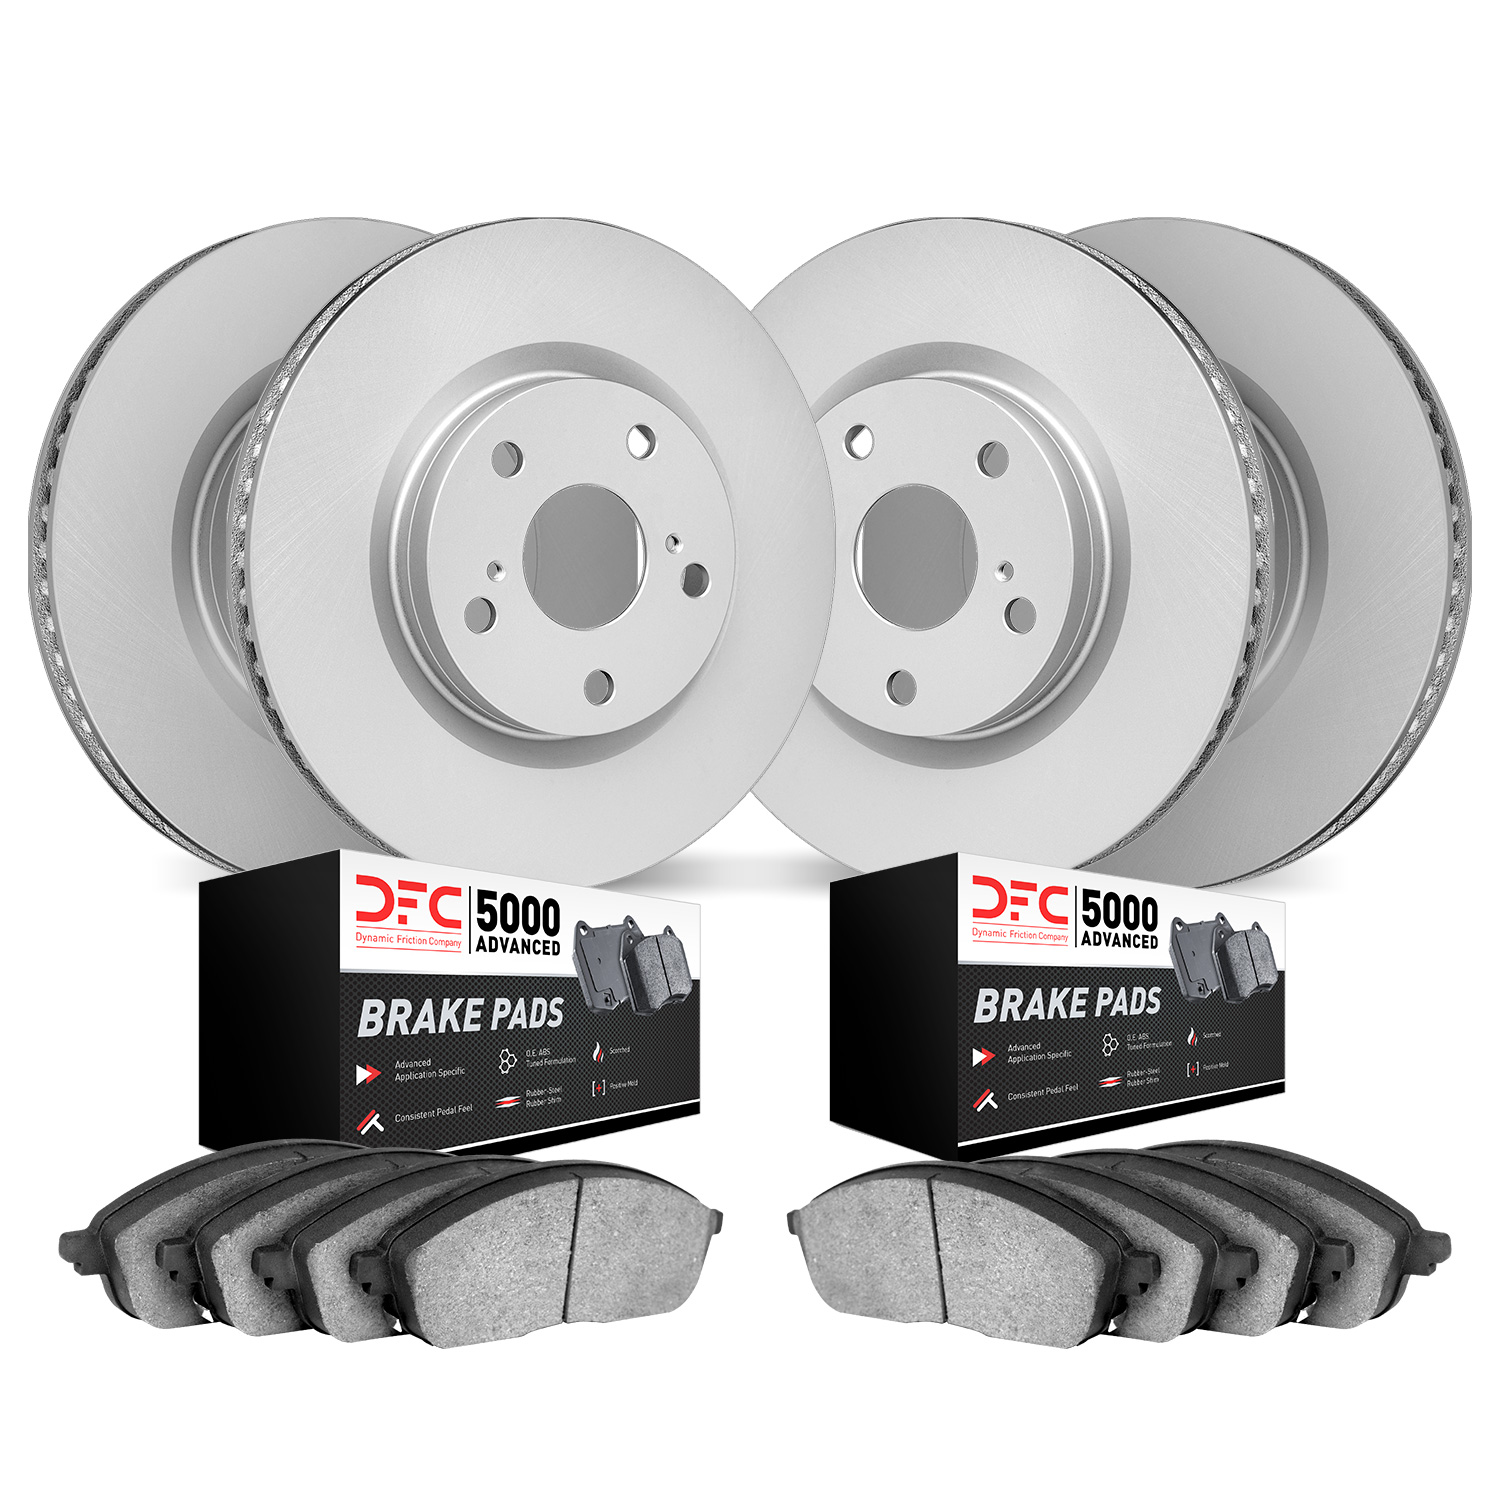 4504-75026 Geospec Brake Rotors w/5000 Advanced Brake Pads Kit, Fits Select Lexus/Toyota/Scion, Position: Front and Rear